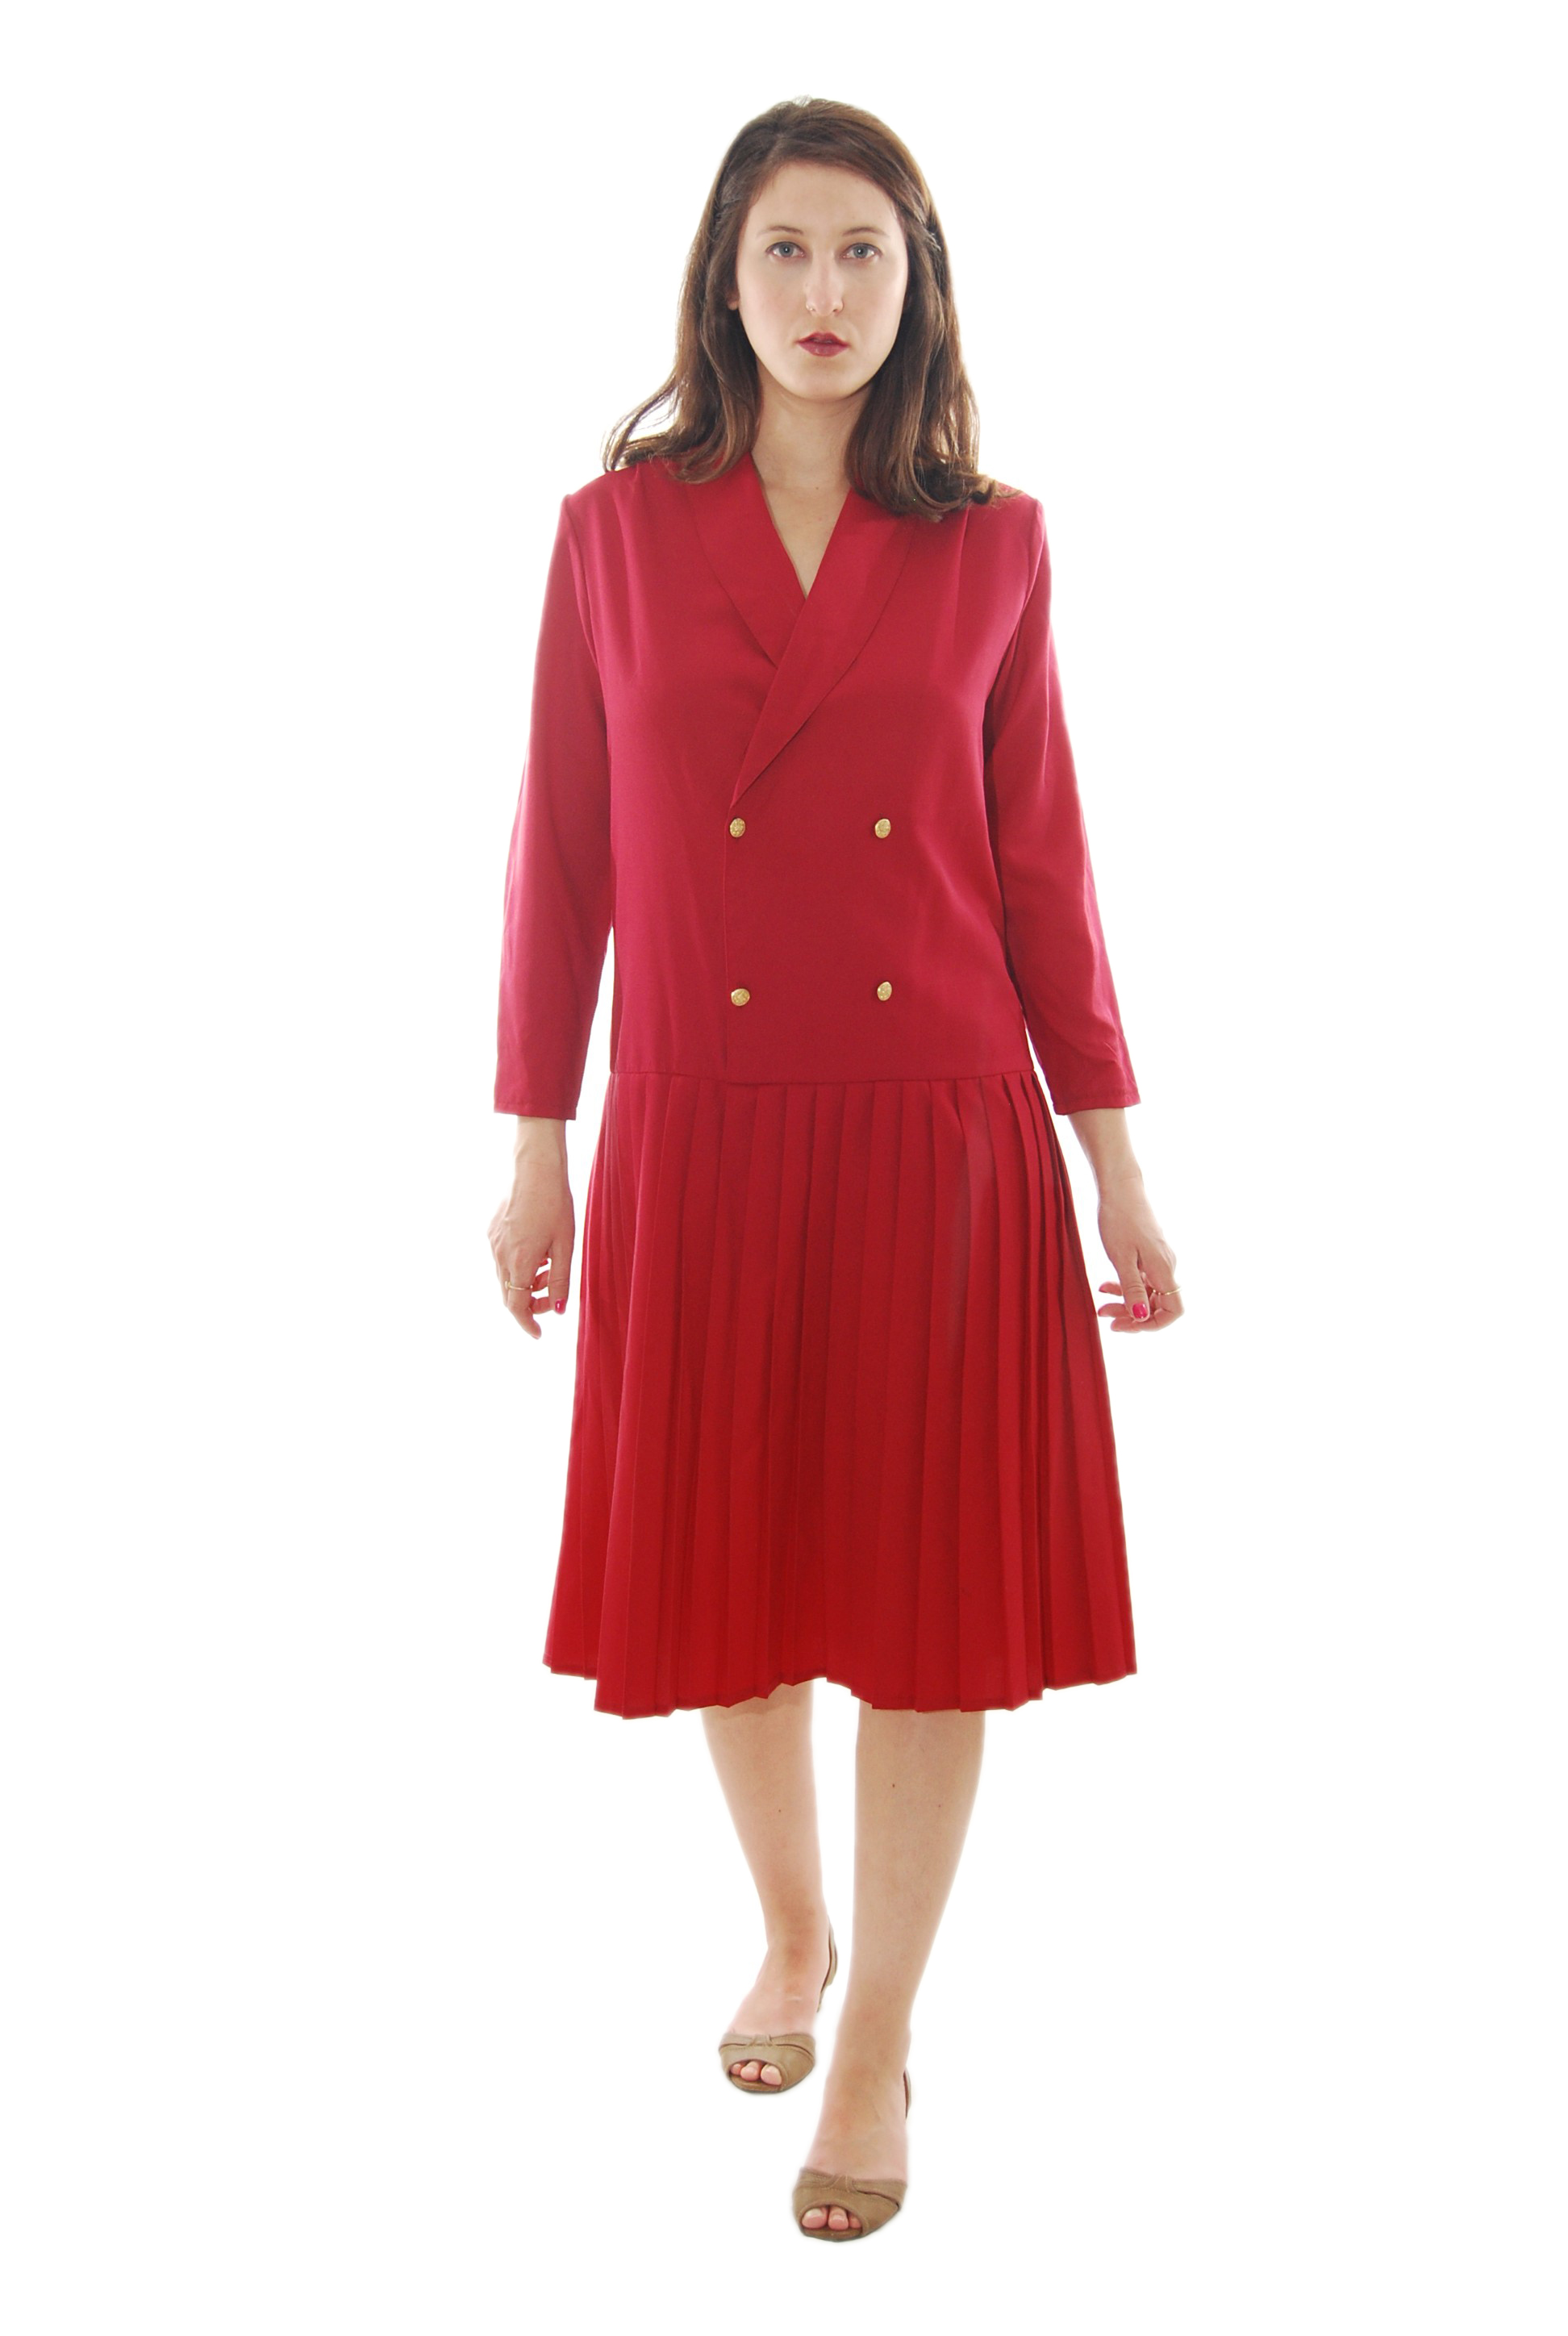 Women clothing what red 360